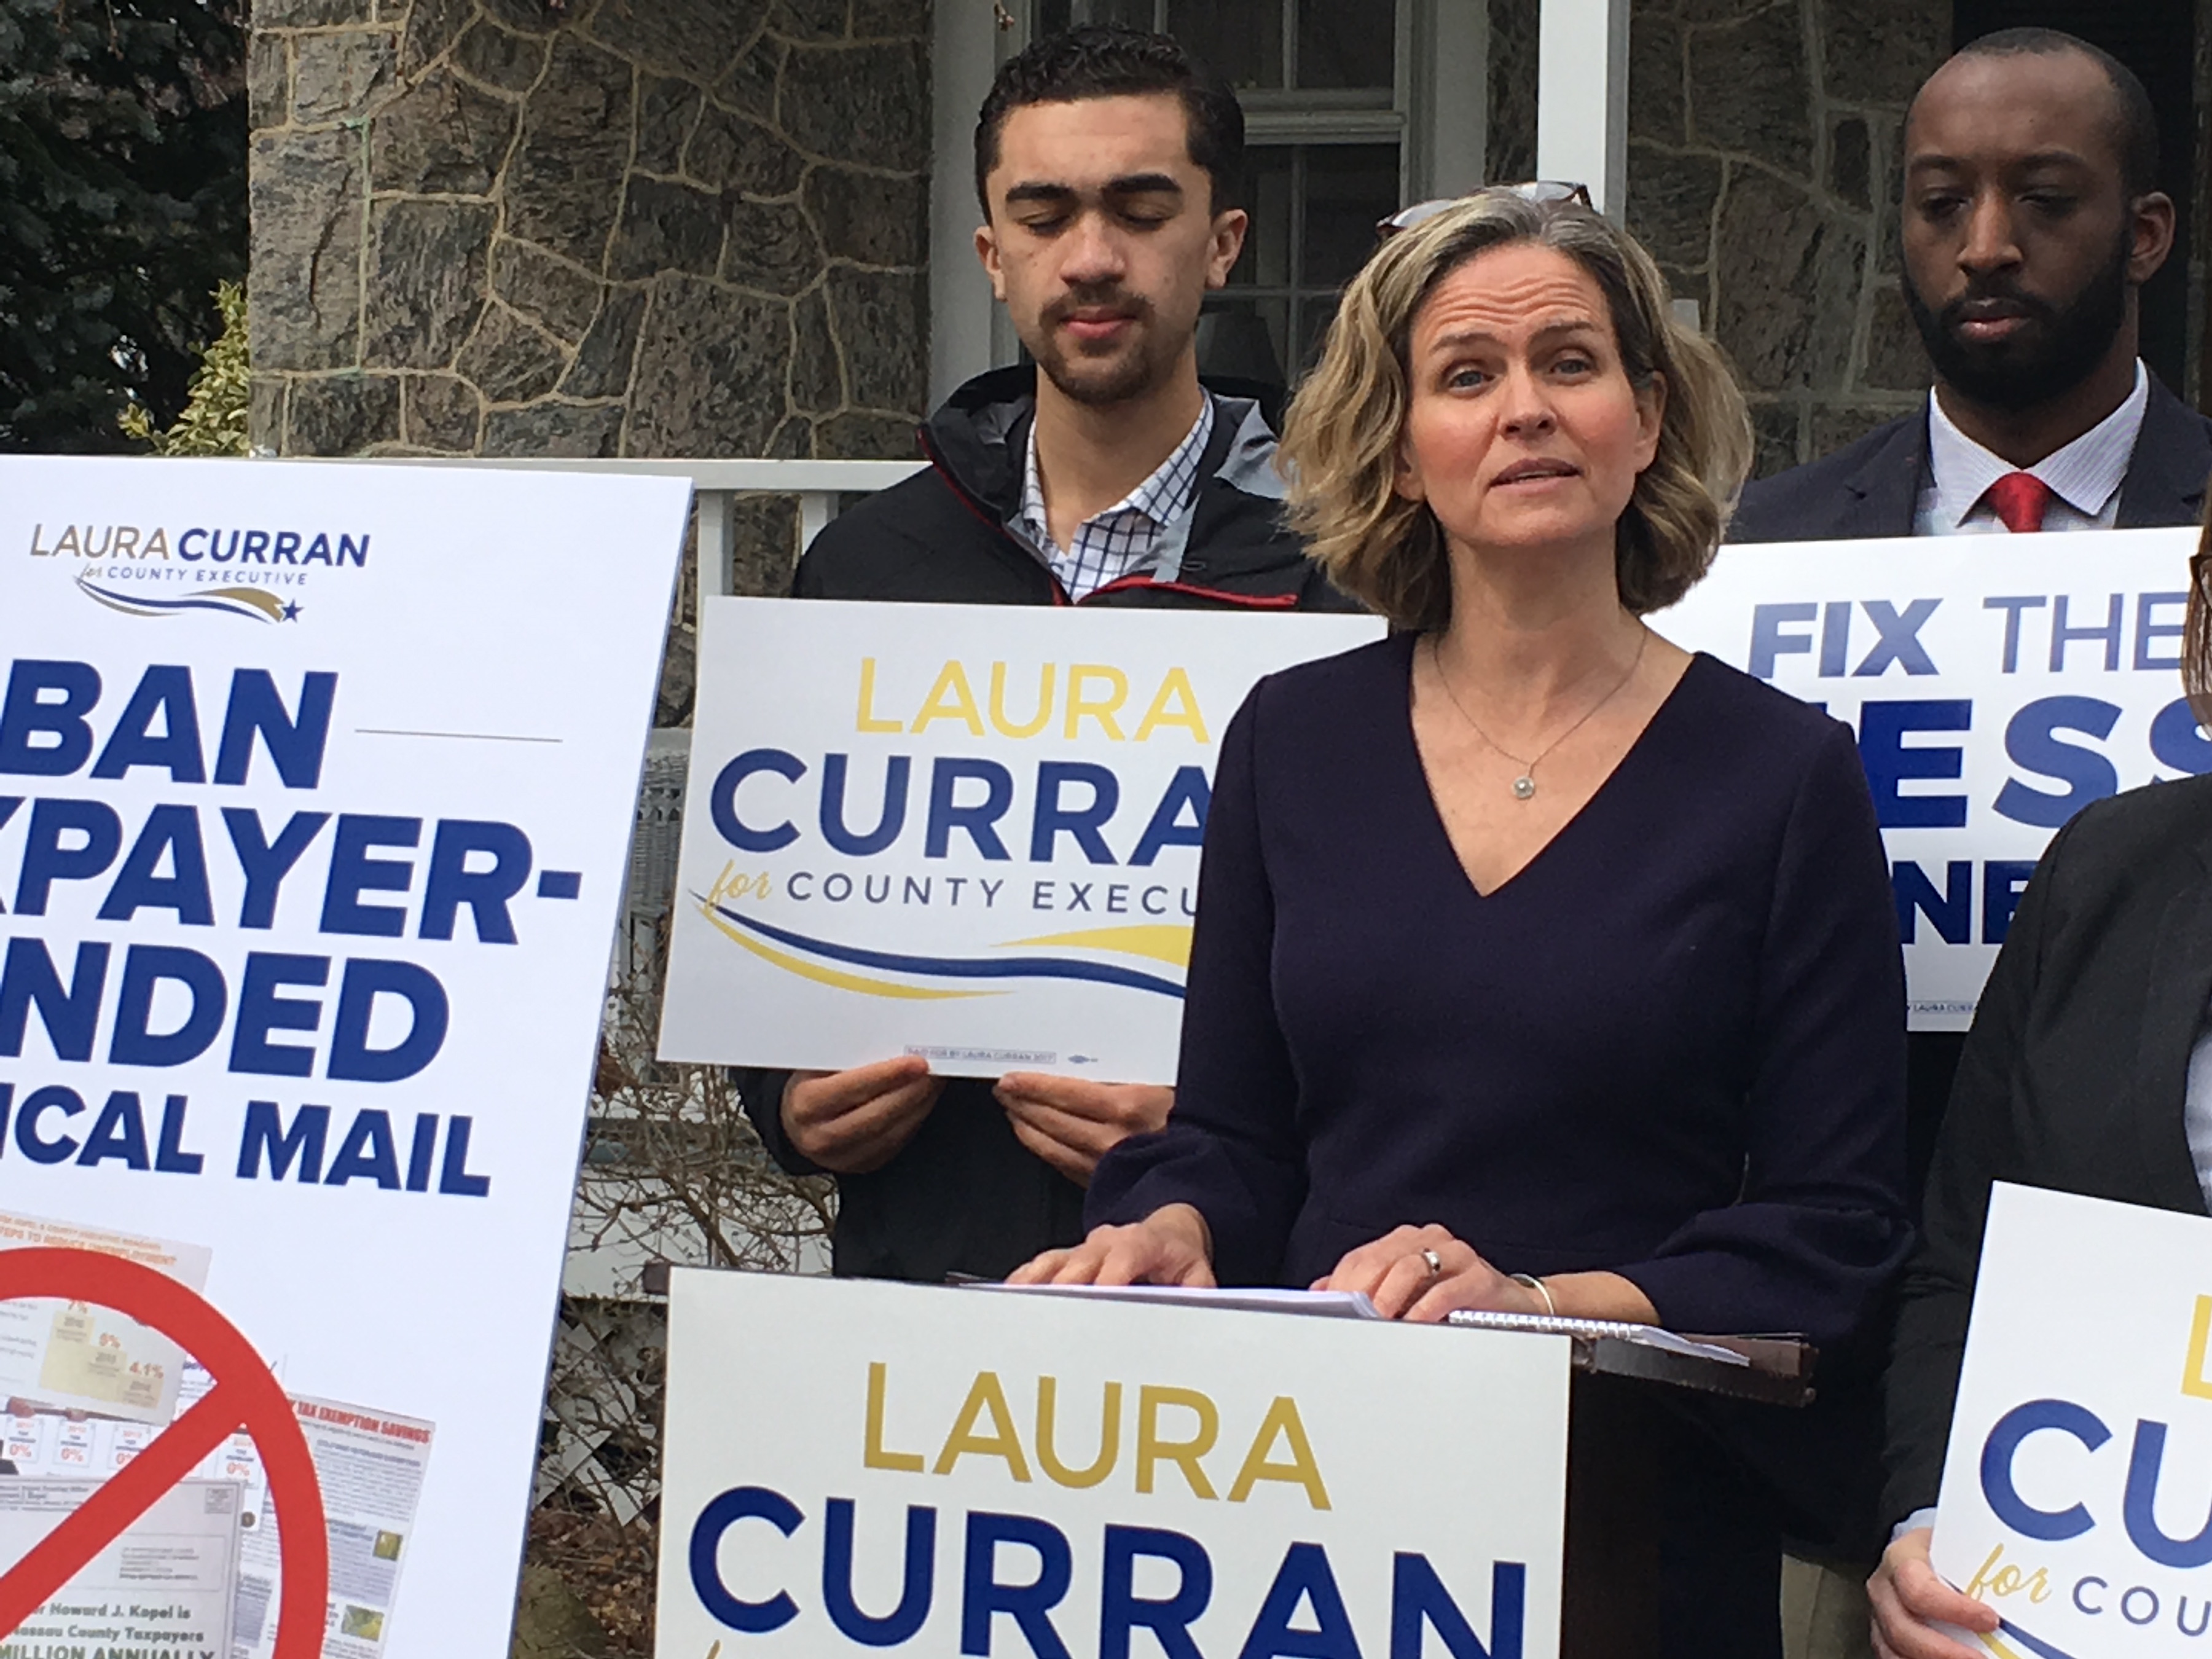 Laura Curran floats strict rules for government mailings